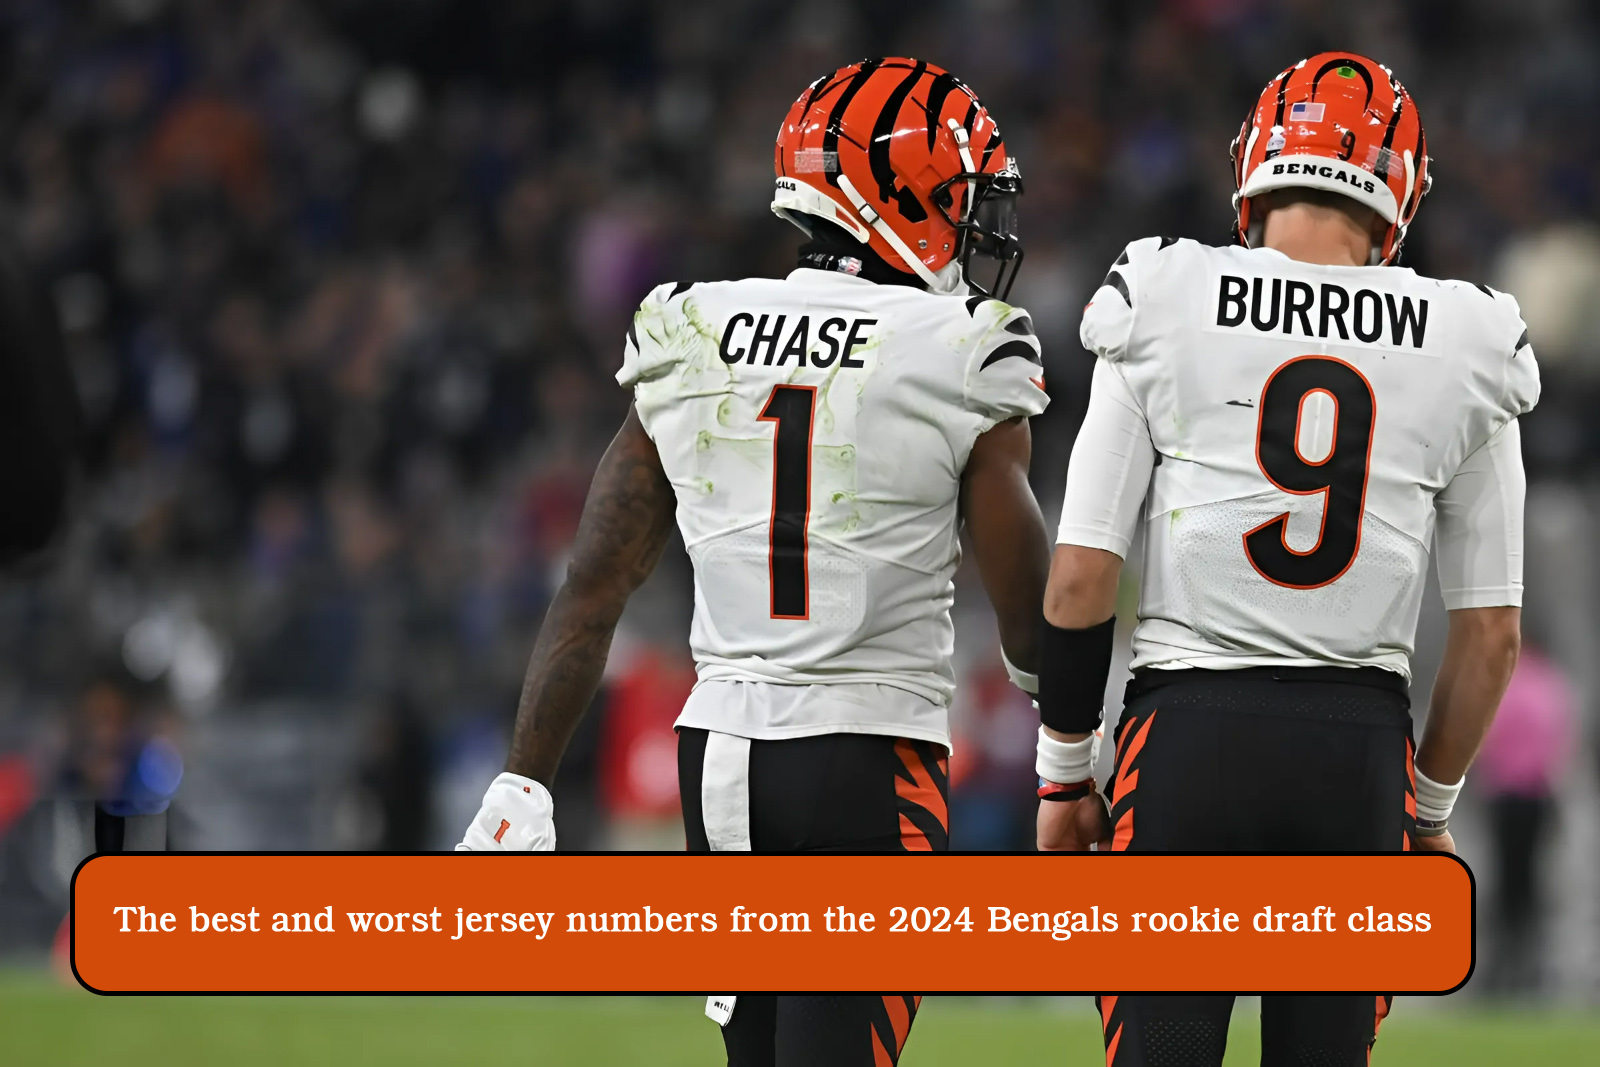 The best and worst jersey numbers from the 2024 Bengals rookie draft class